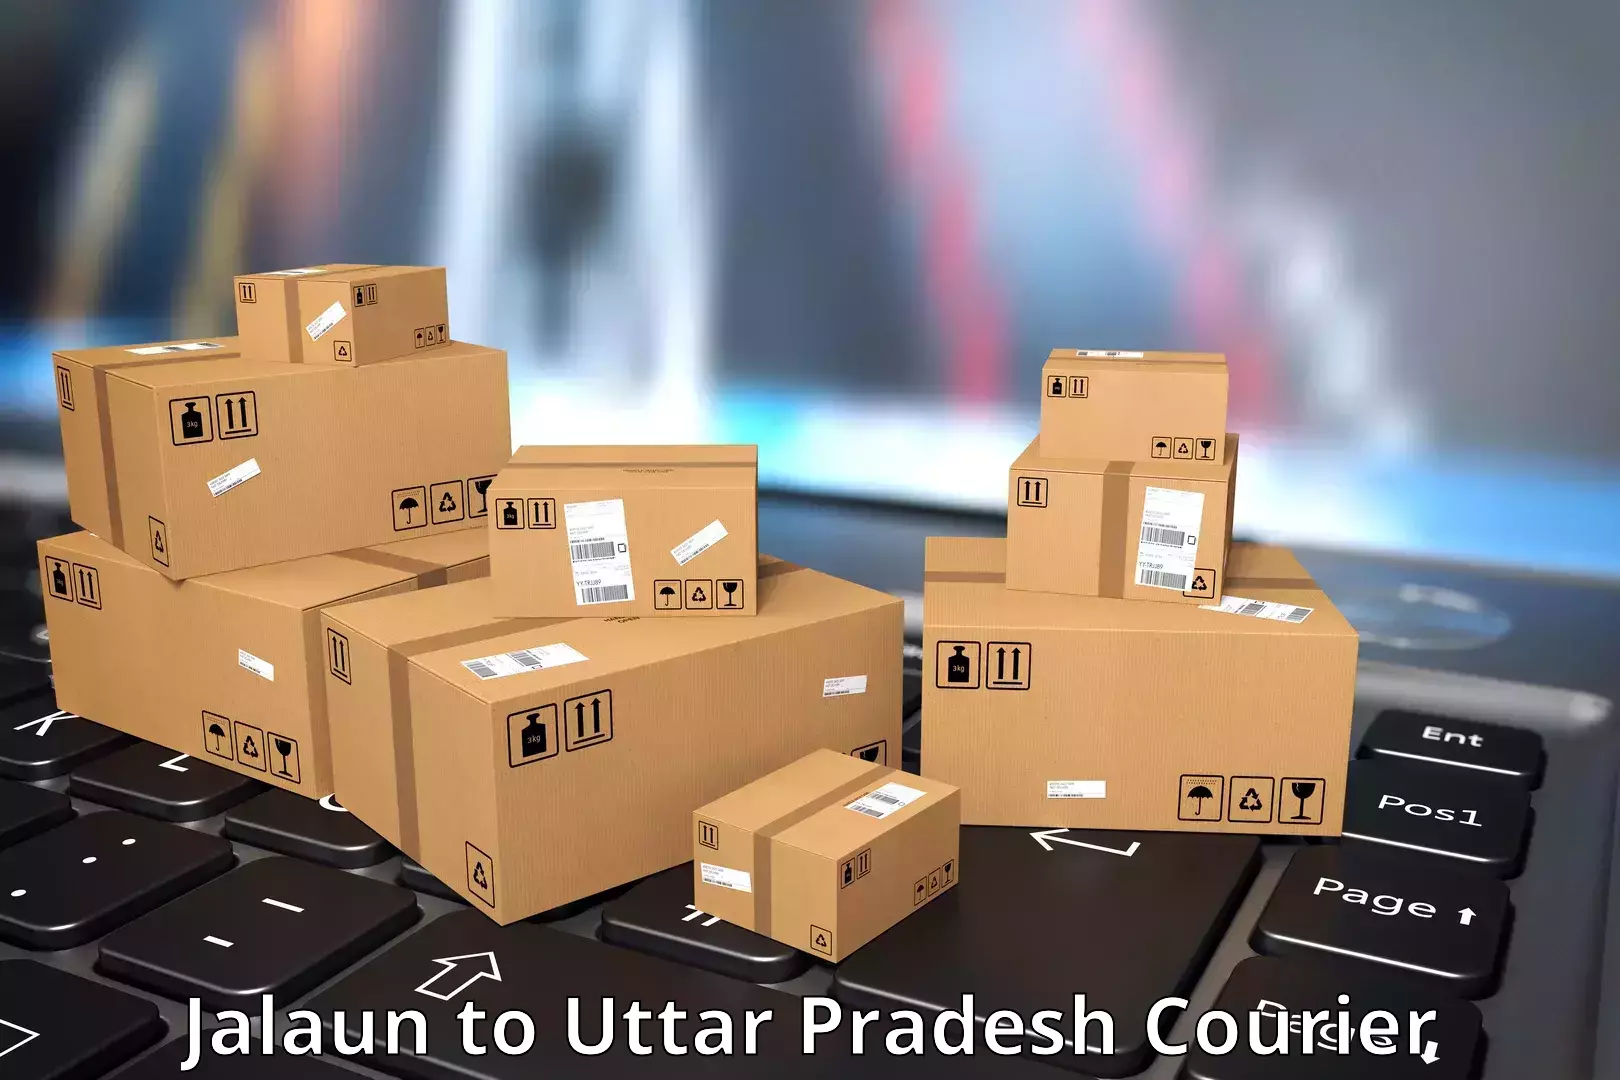 Next-generation courier services Jalaun to Aligarh